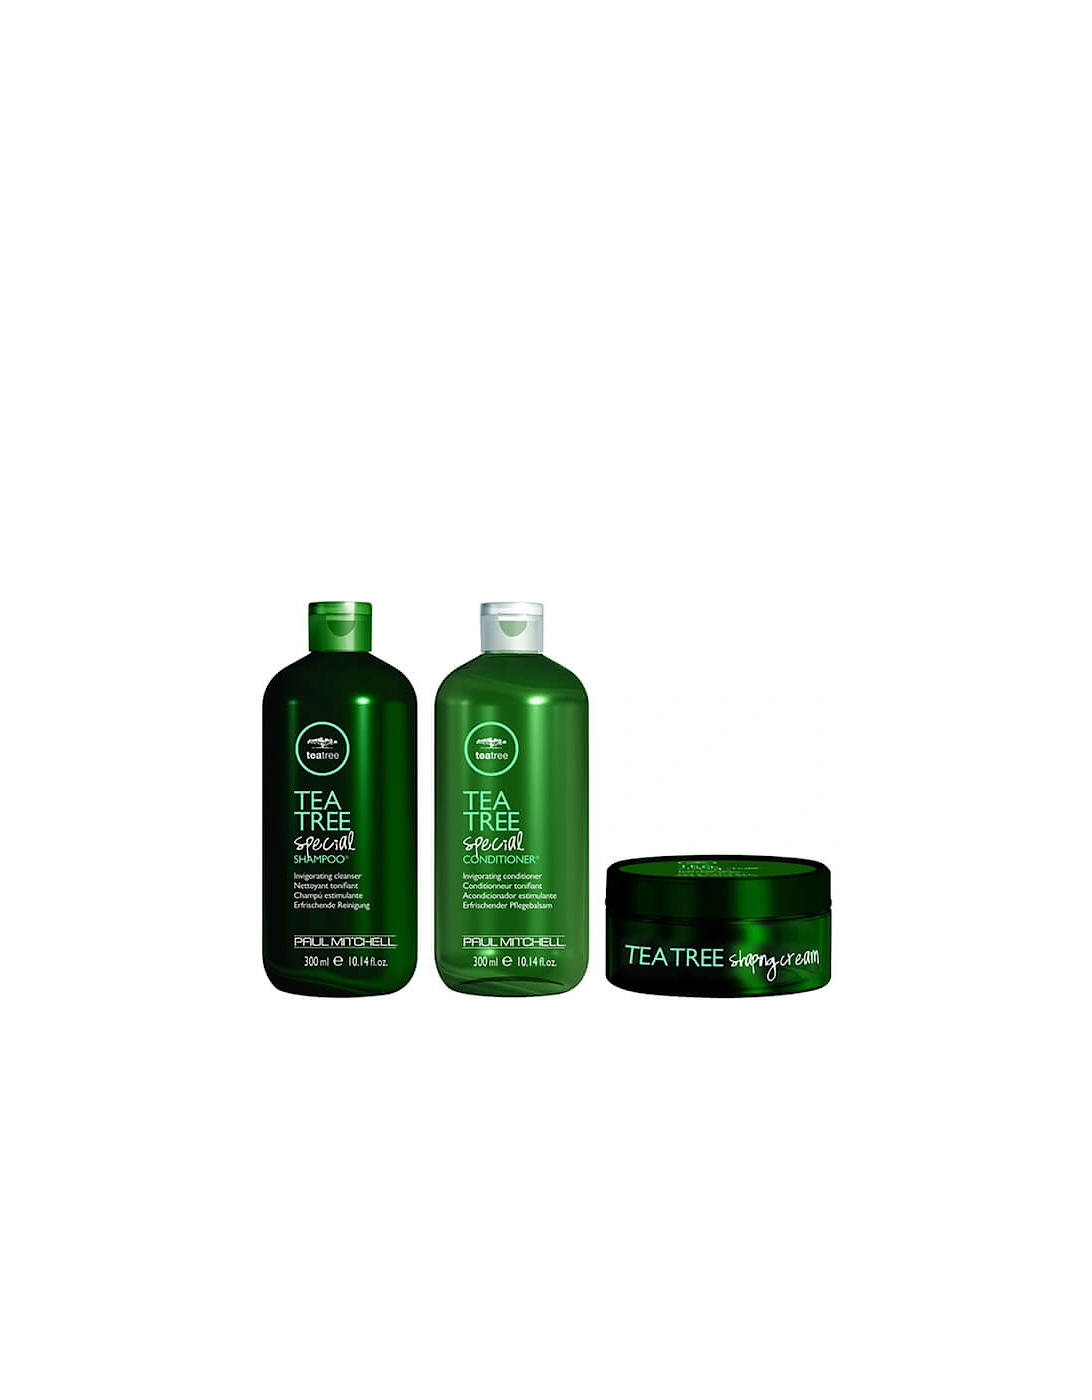 Tea Tree Special Shampoo, Conditioner and Shaping Cream Trio - Paul Mitchell, 2 of 1